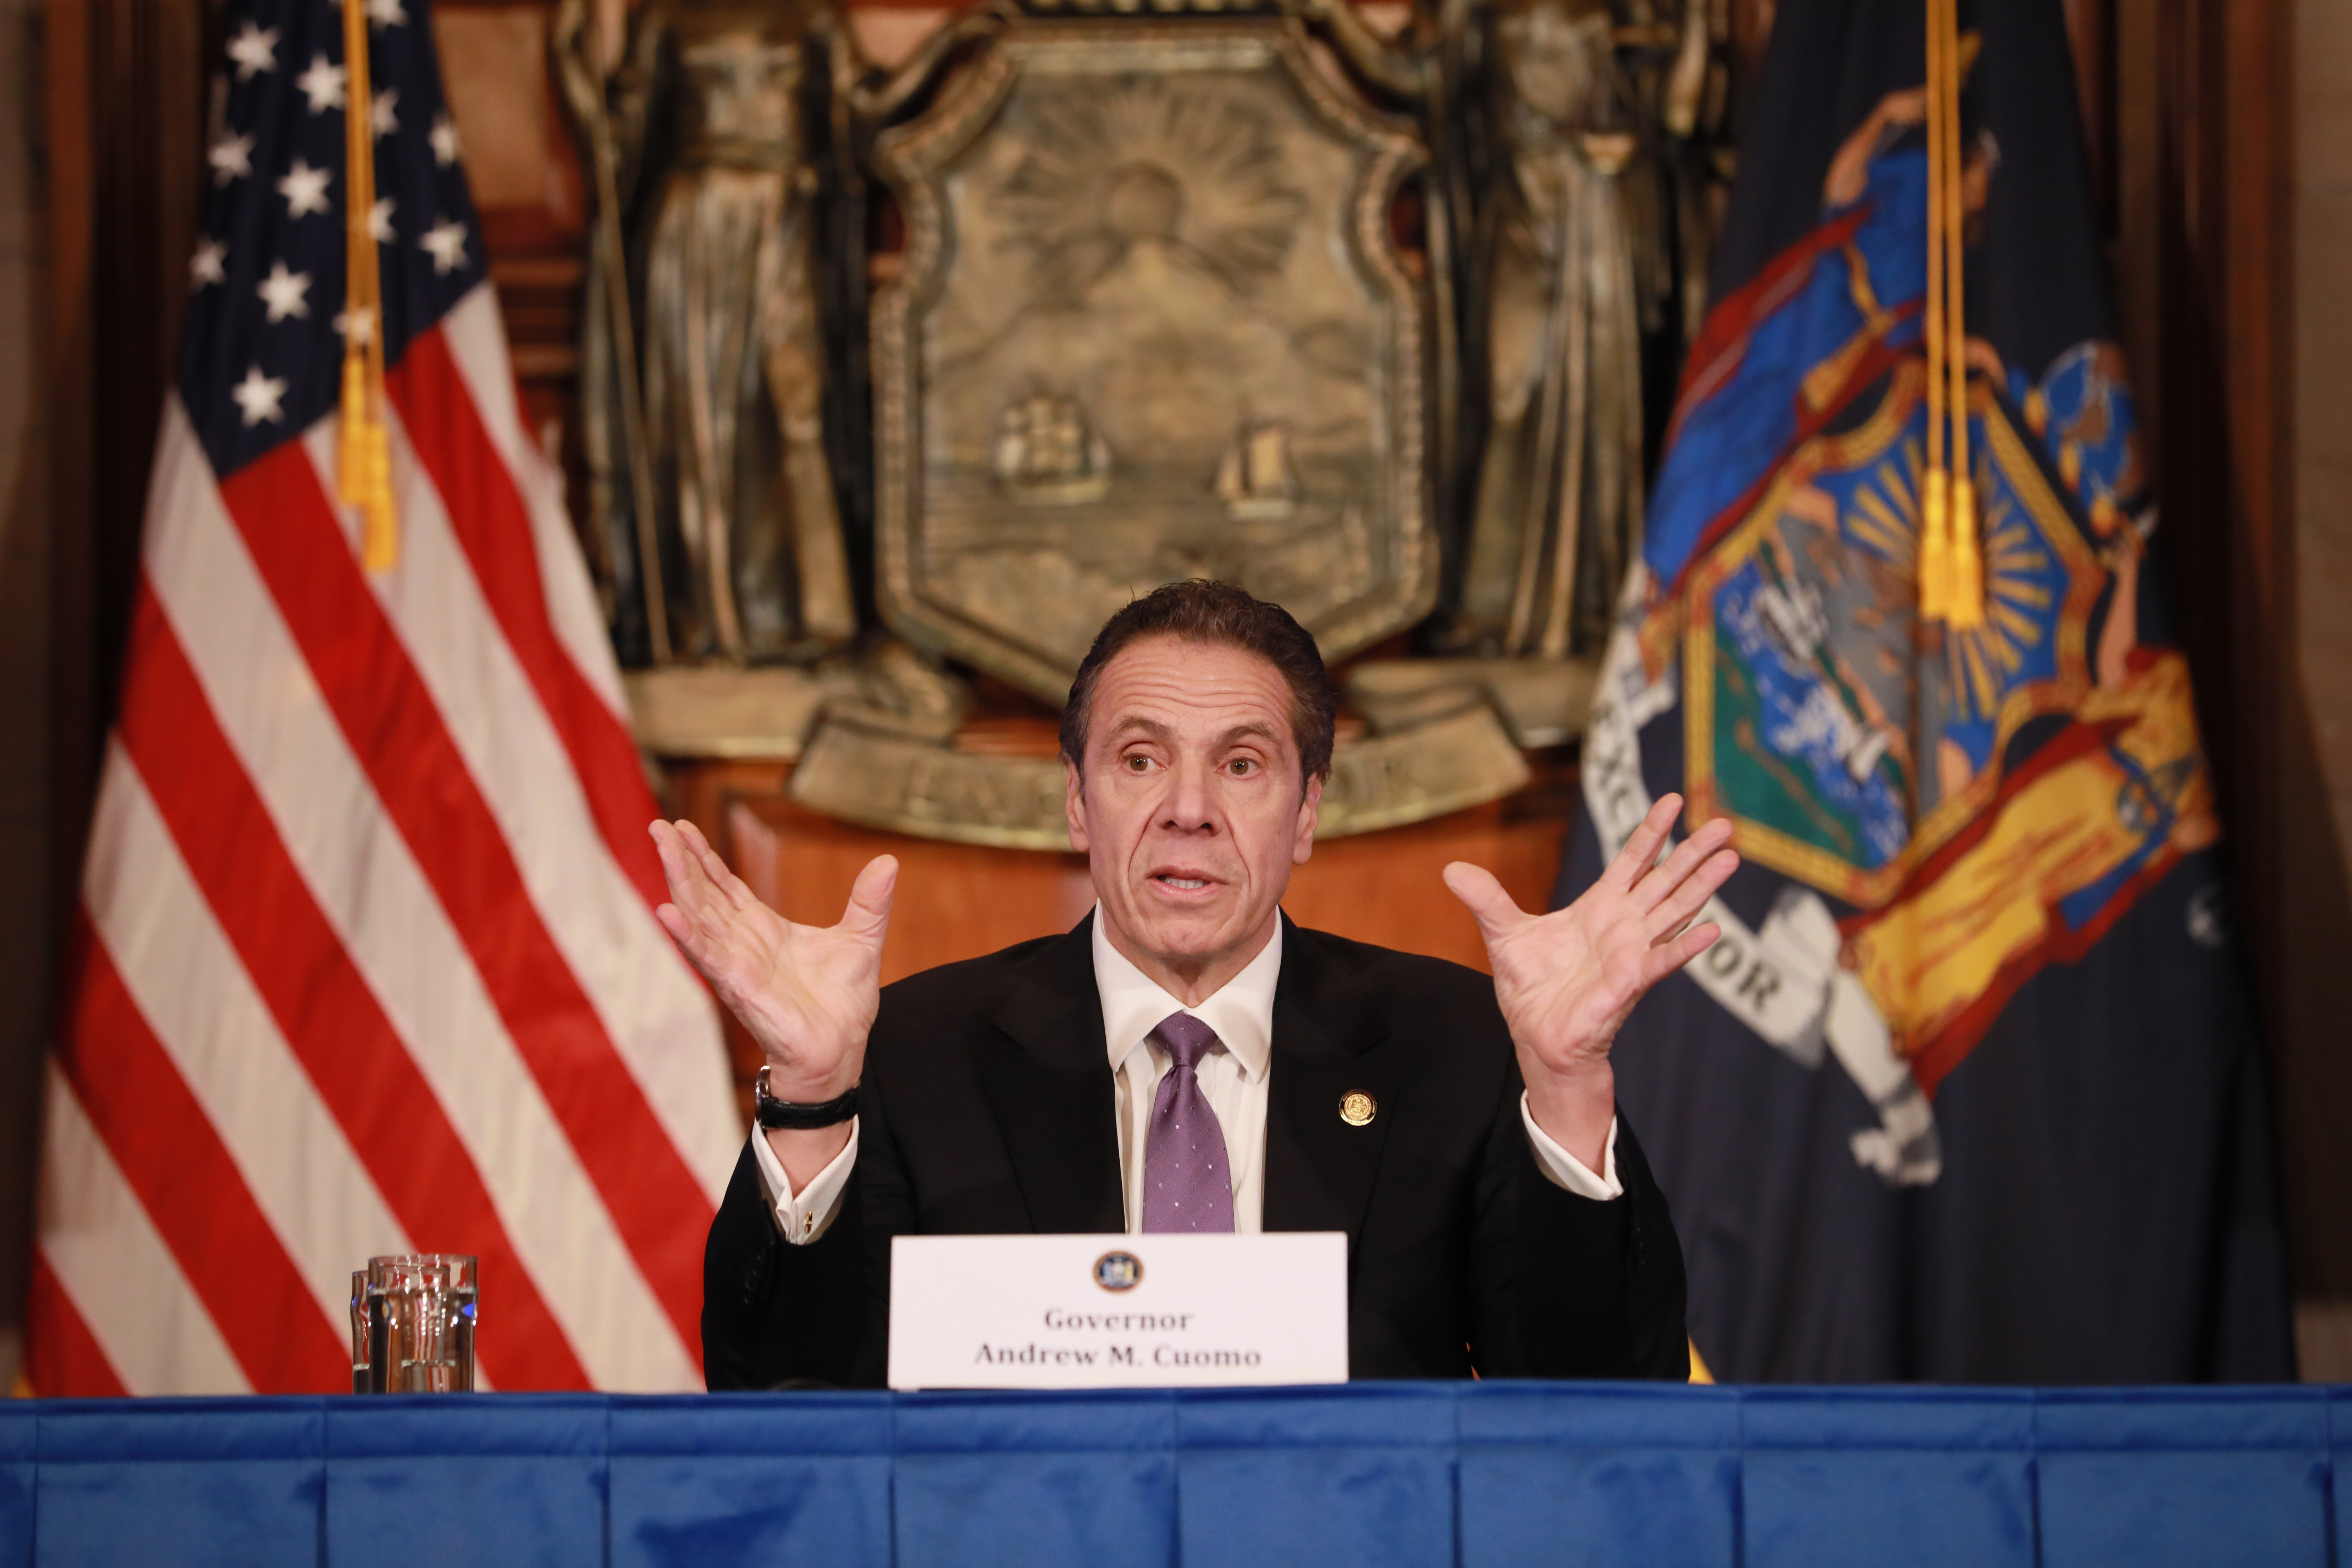 New York Gov. Andrew Cuomo speaks about the coronavirus during a press briefing in Albany, New York, on April 17.